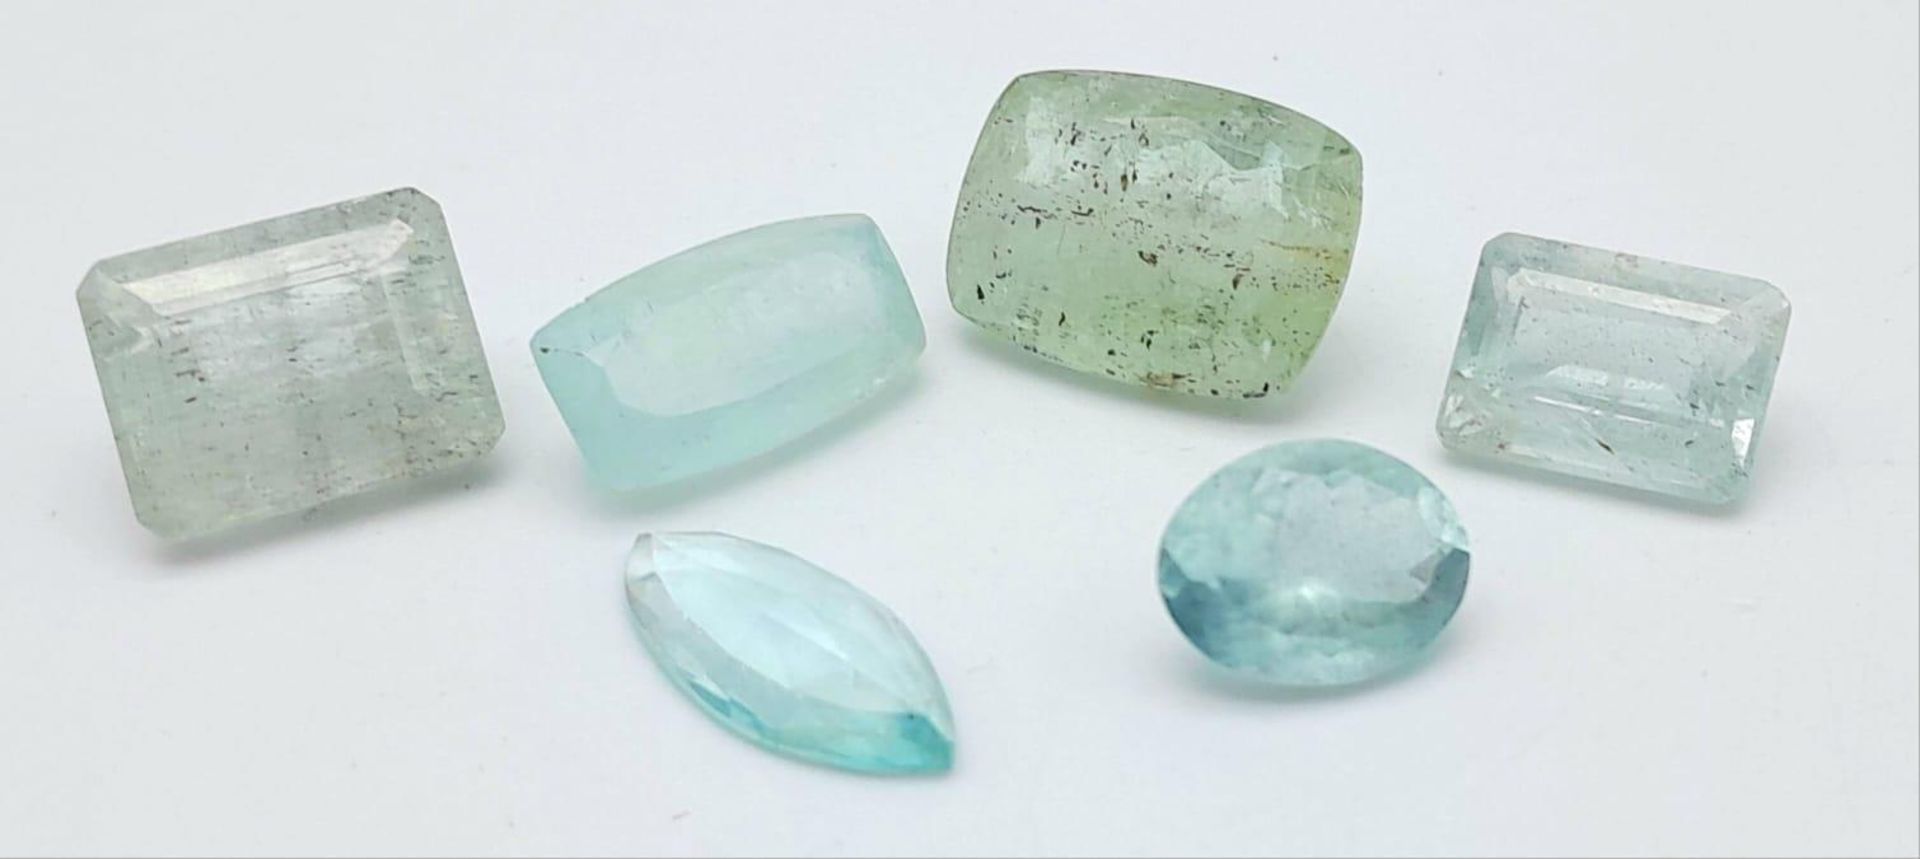 A 44.05ct Faceted Aquamarine Gemstones Lot of 6 Pieces. Mixed Shapes.